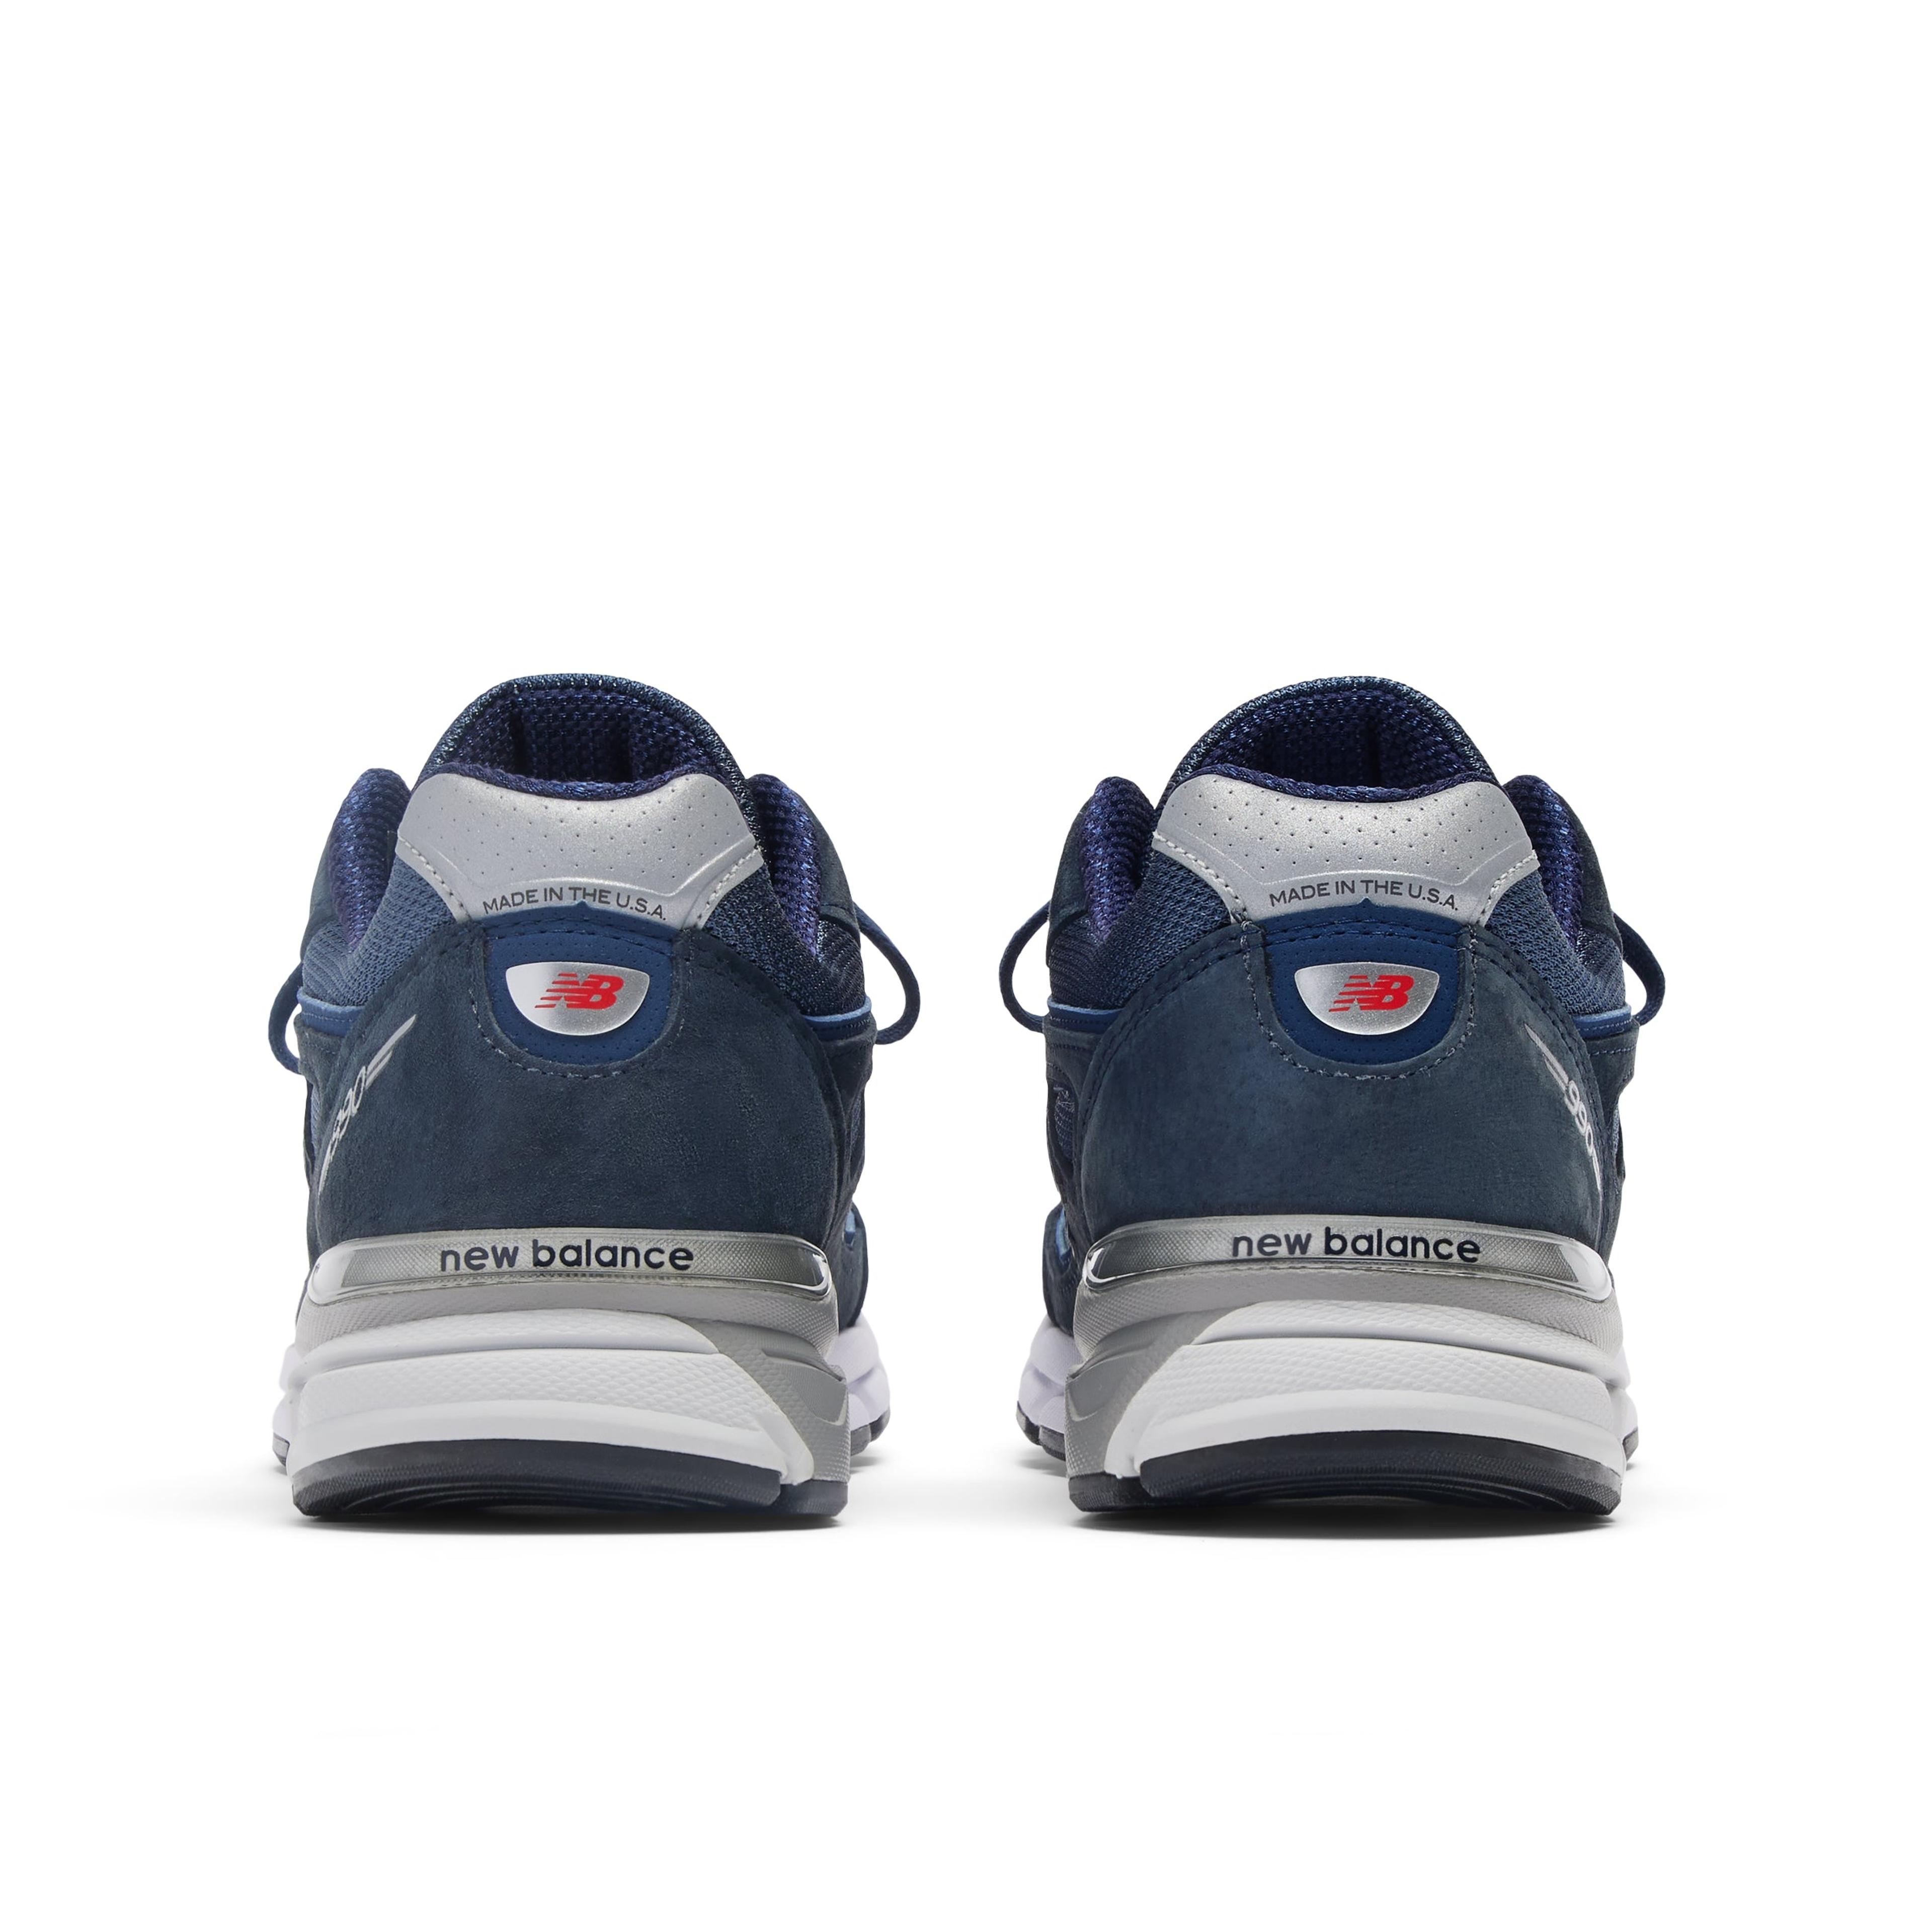 Alternate View 3 of New Balance 990v4 "Made in USA" Navy